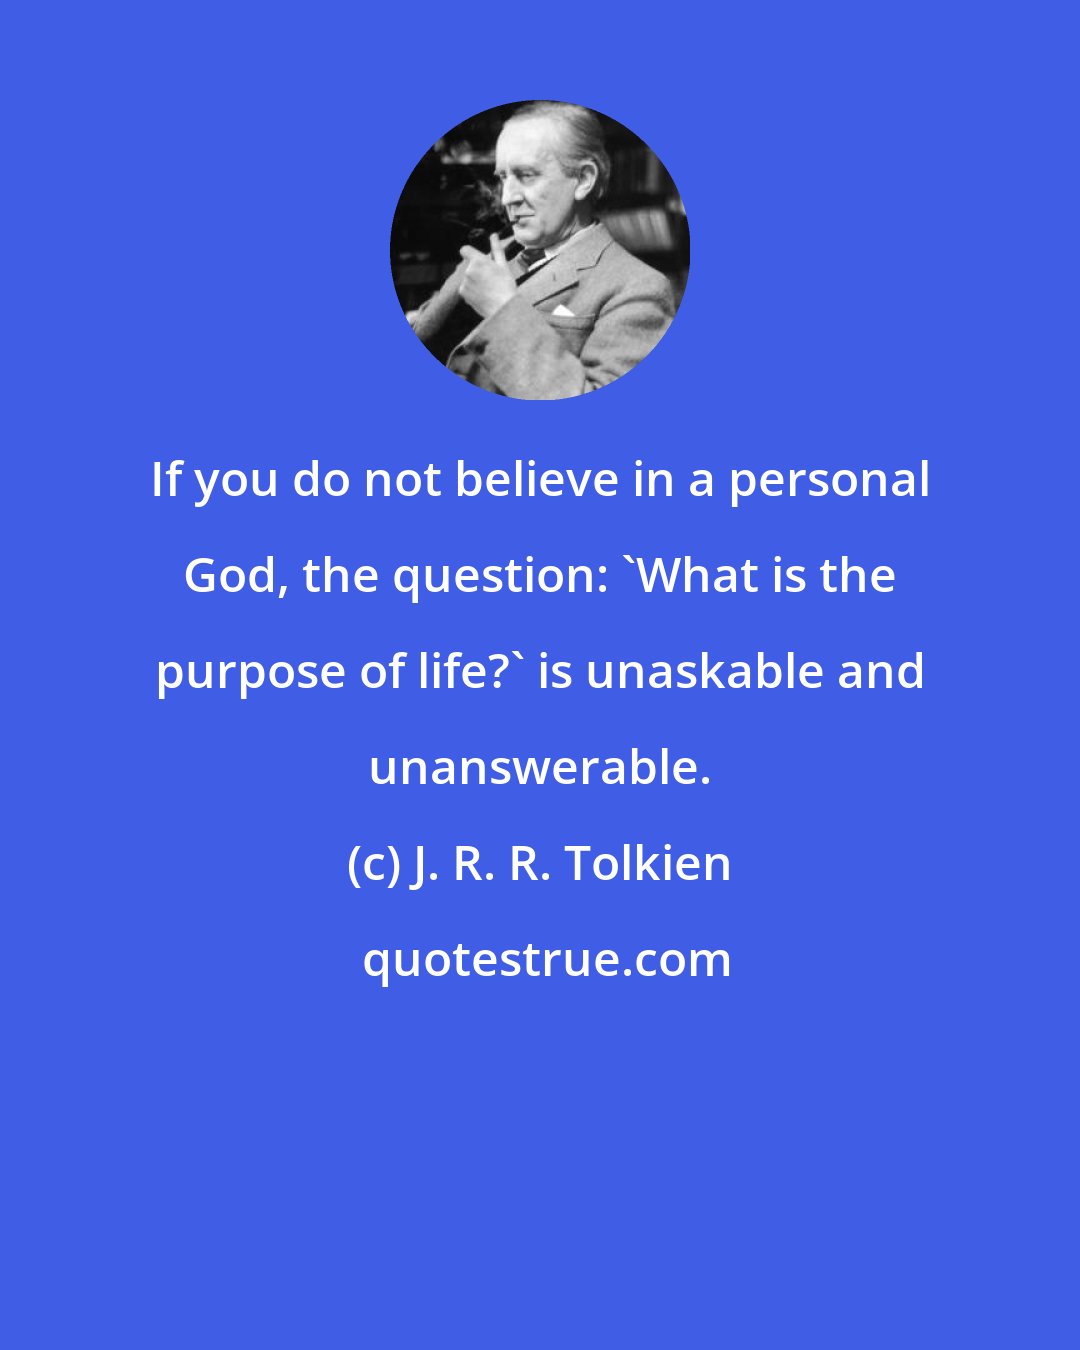 J. R. R. Tolkien: If you do not believe in a personal God, the question: 'What is the purpose of life?' is unaskable and unanswerable.